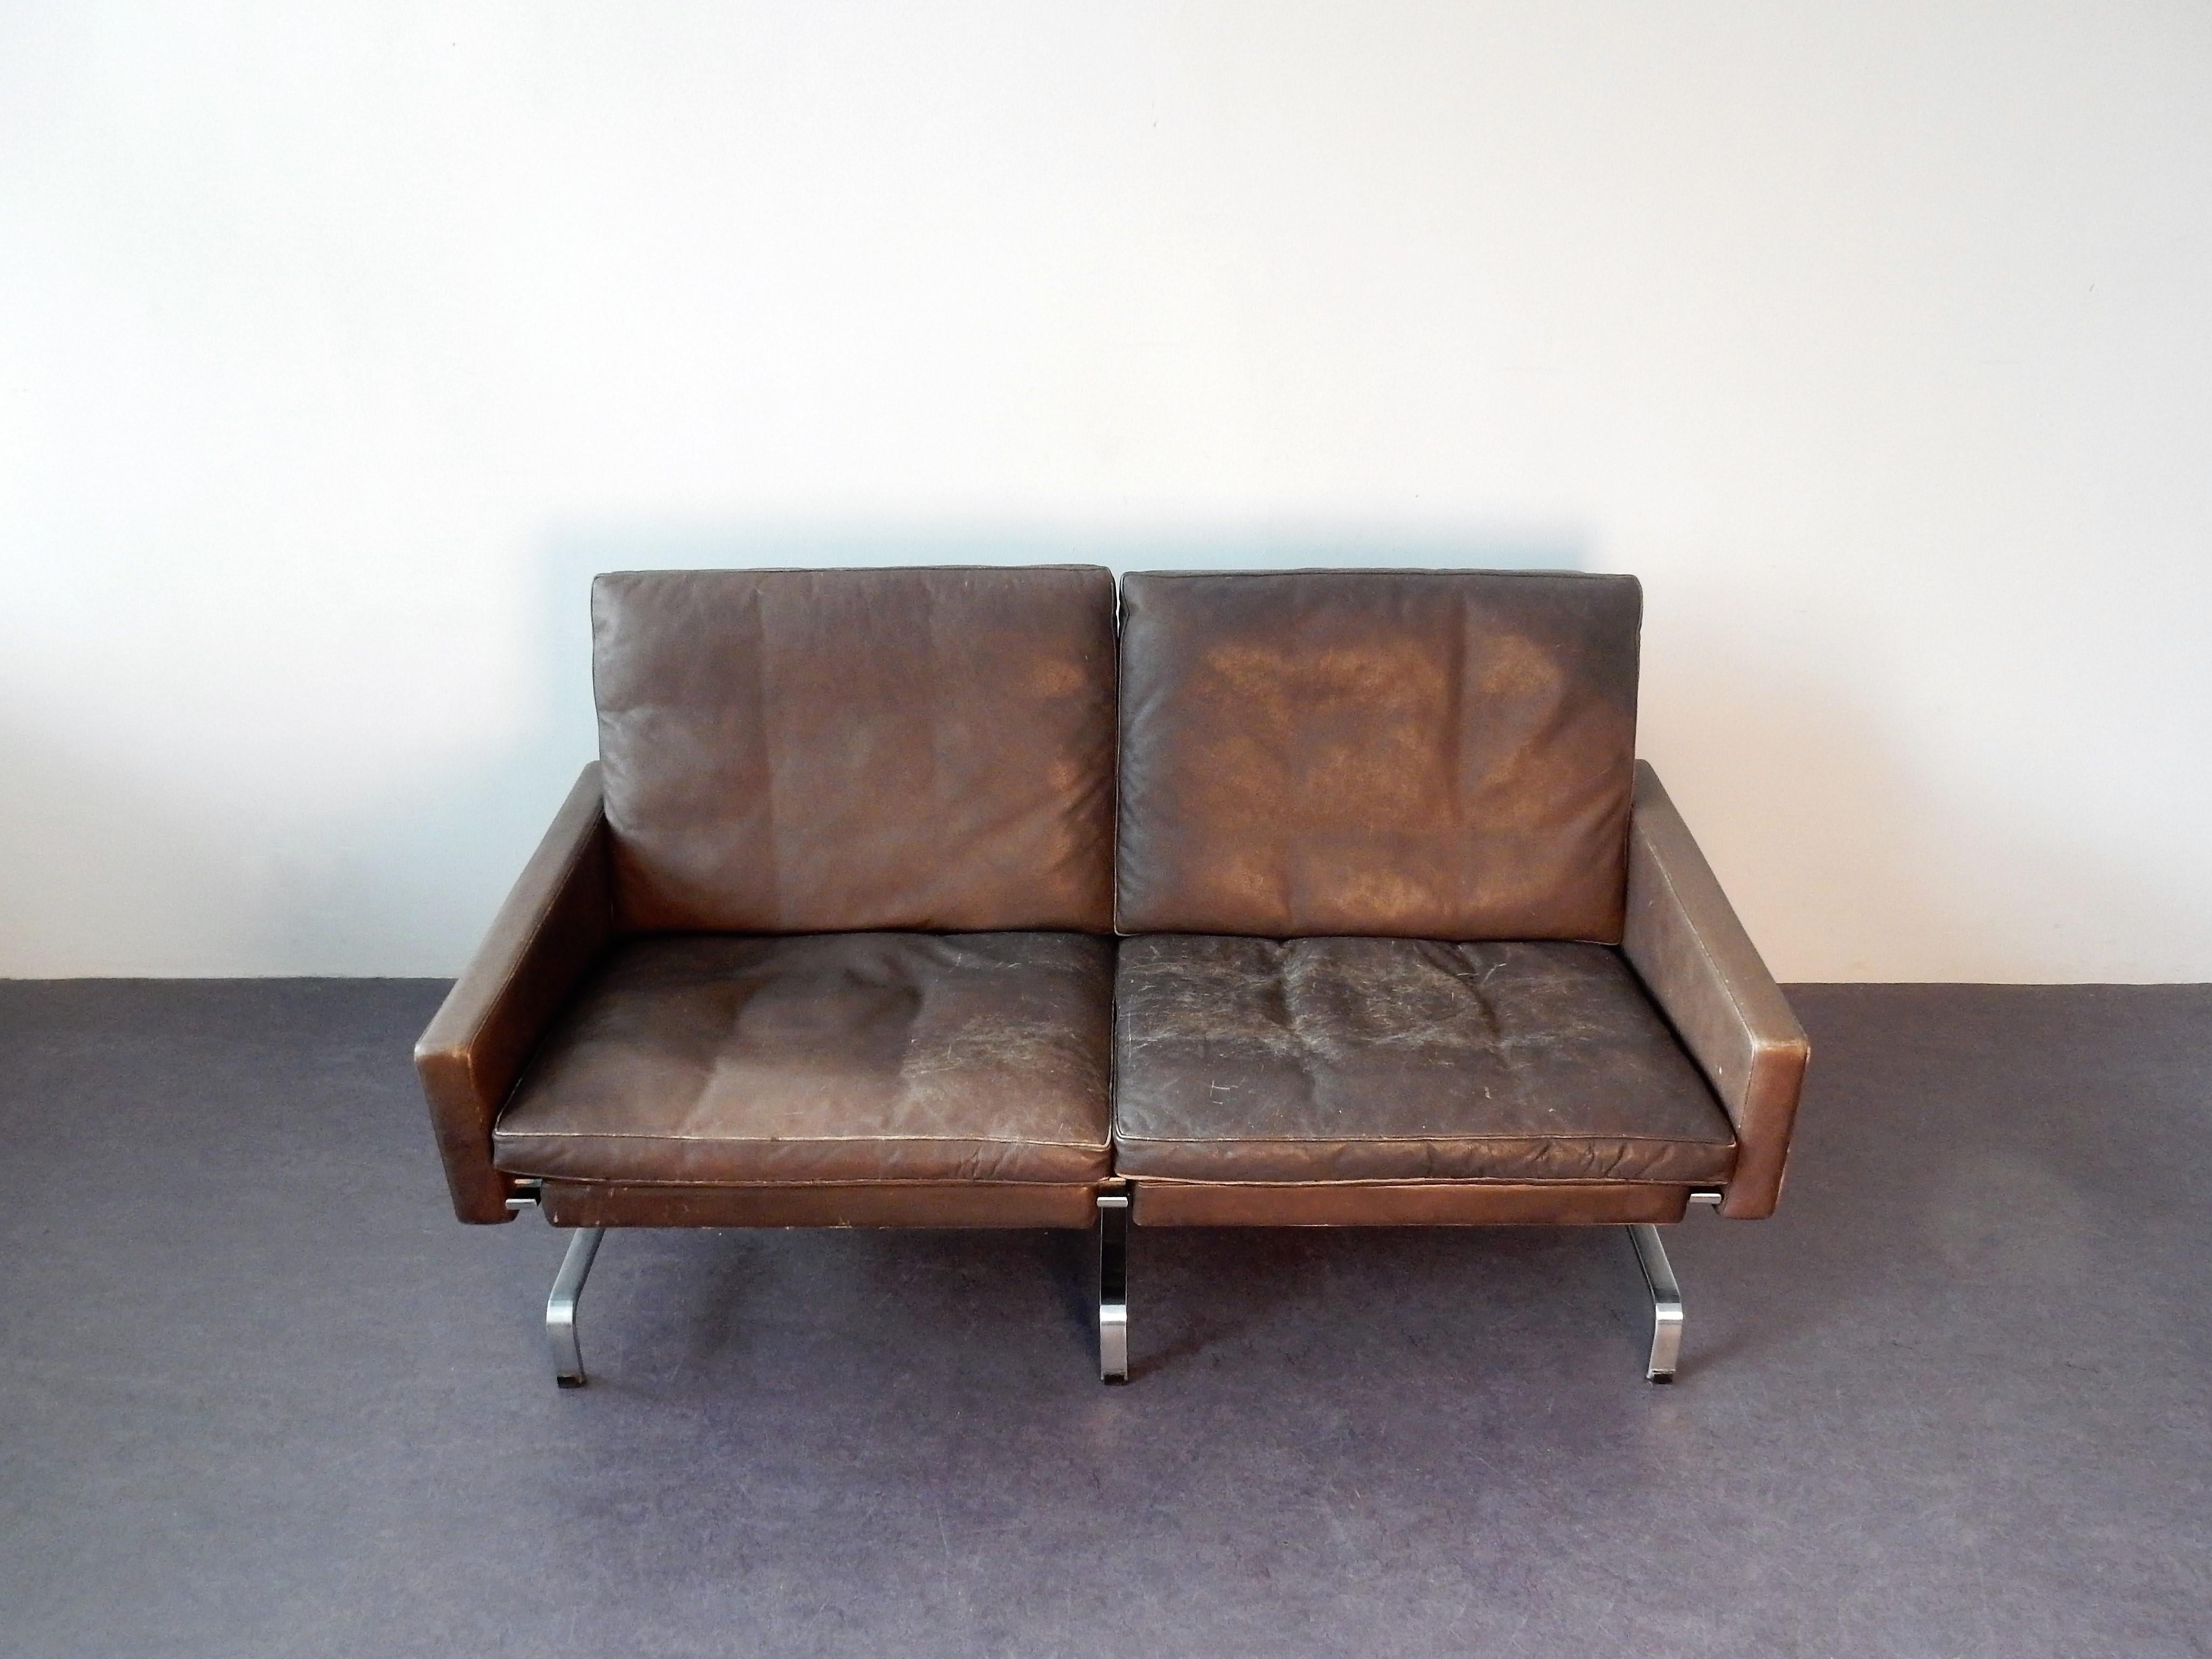 This sofa comes from a bank building in Denmark. It is completely original and marked with the original marking of E. Kold Christensen on the bottom bar.
The dark brown leather has a great patina that shows age and use and tells the story of an